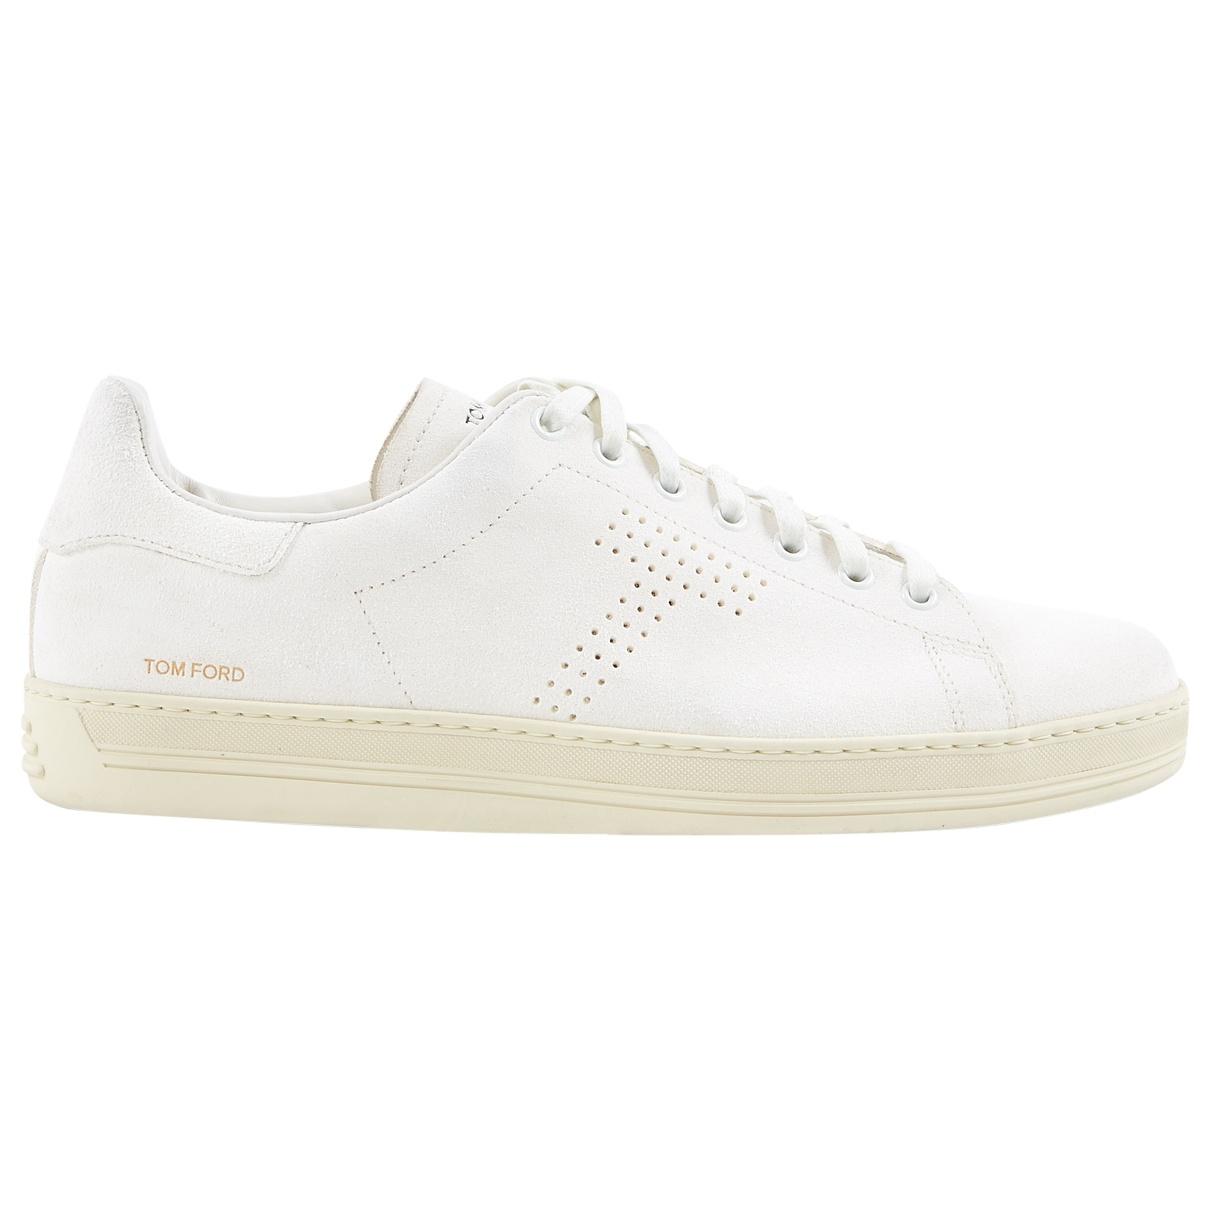 tom ford white trainers